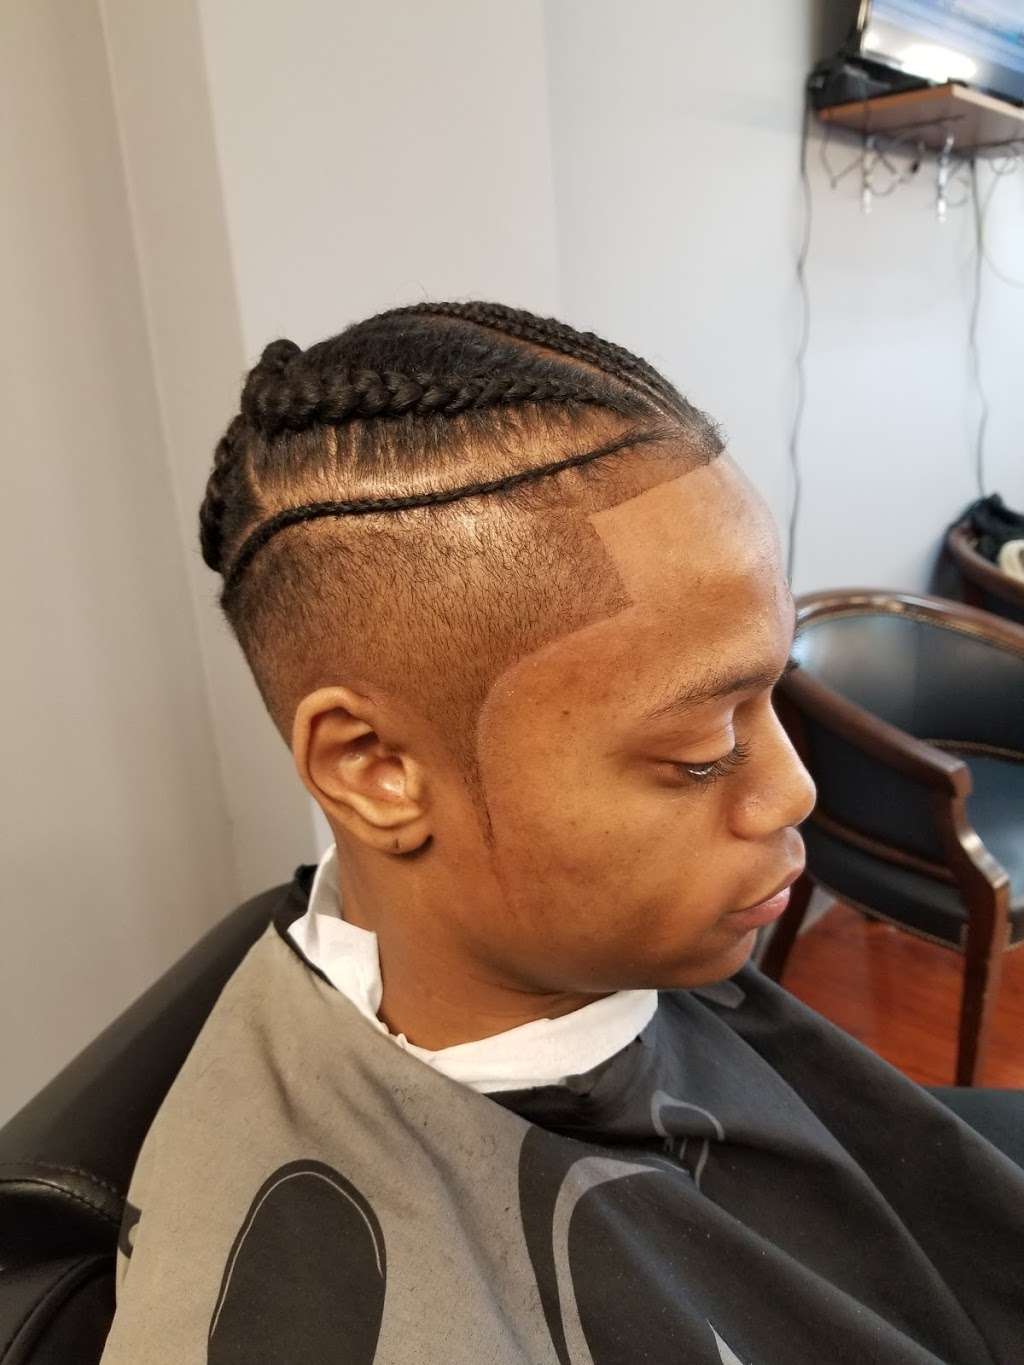 Royal Cuts Gentlemens Grooming - hair care  | Photo 4 of 10 | Address: 3824 Bladensburg Rd, Cottage City, MD 20722, USA | Phone: (240) 714-5505